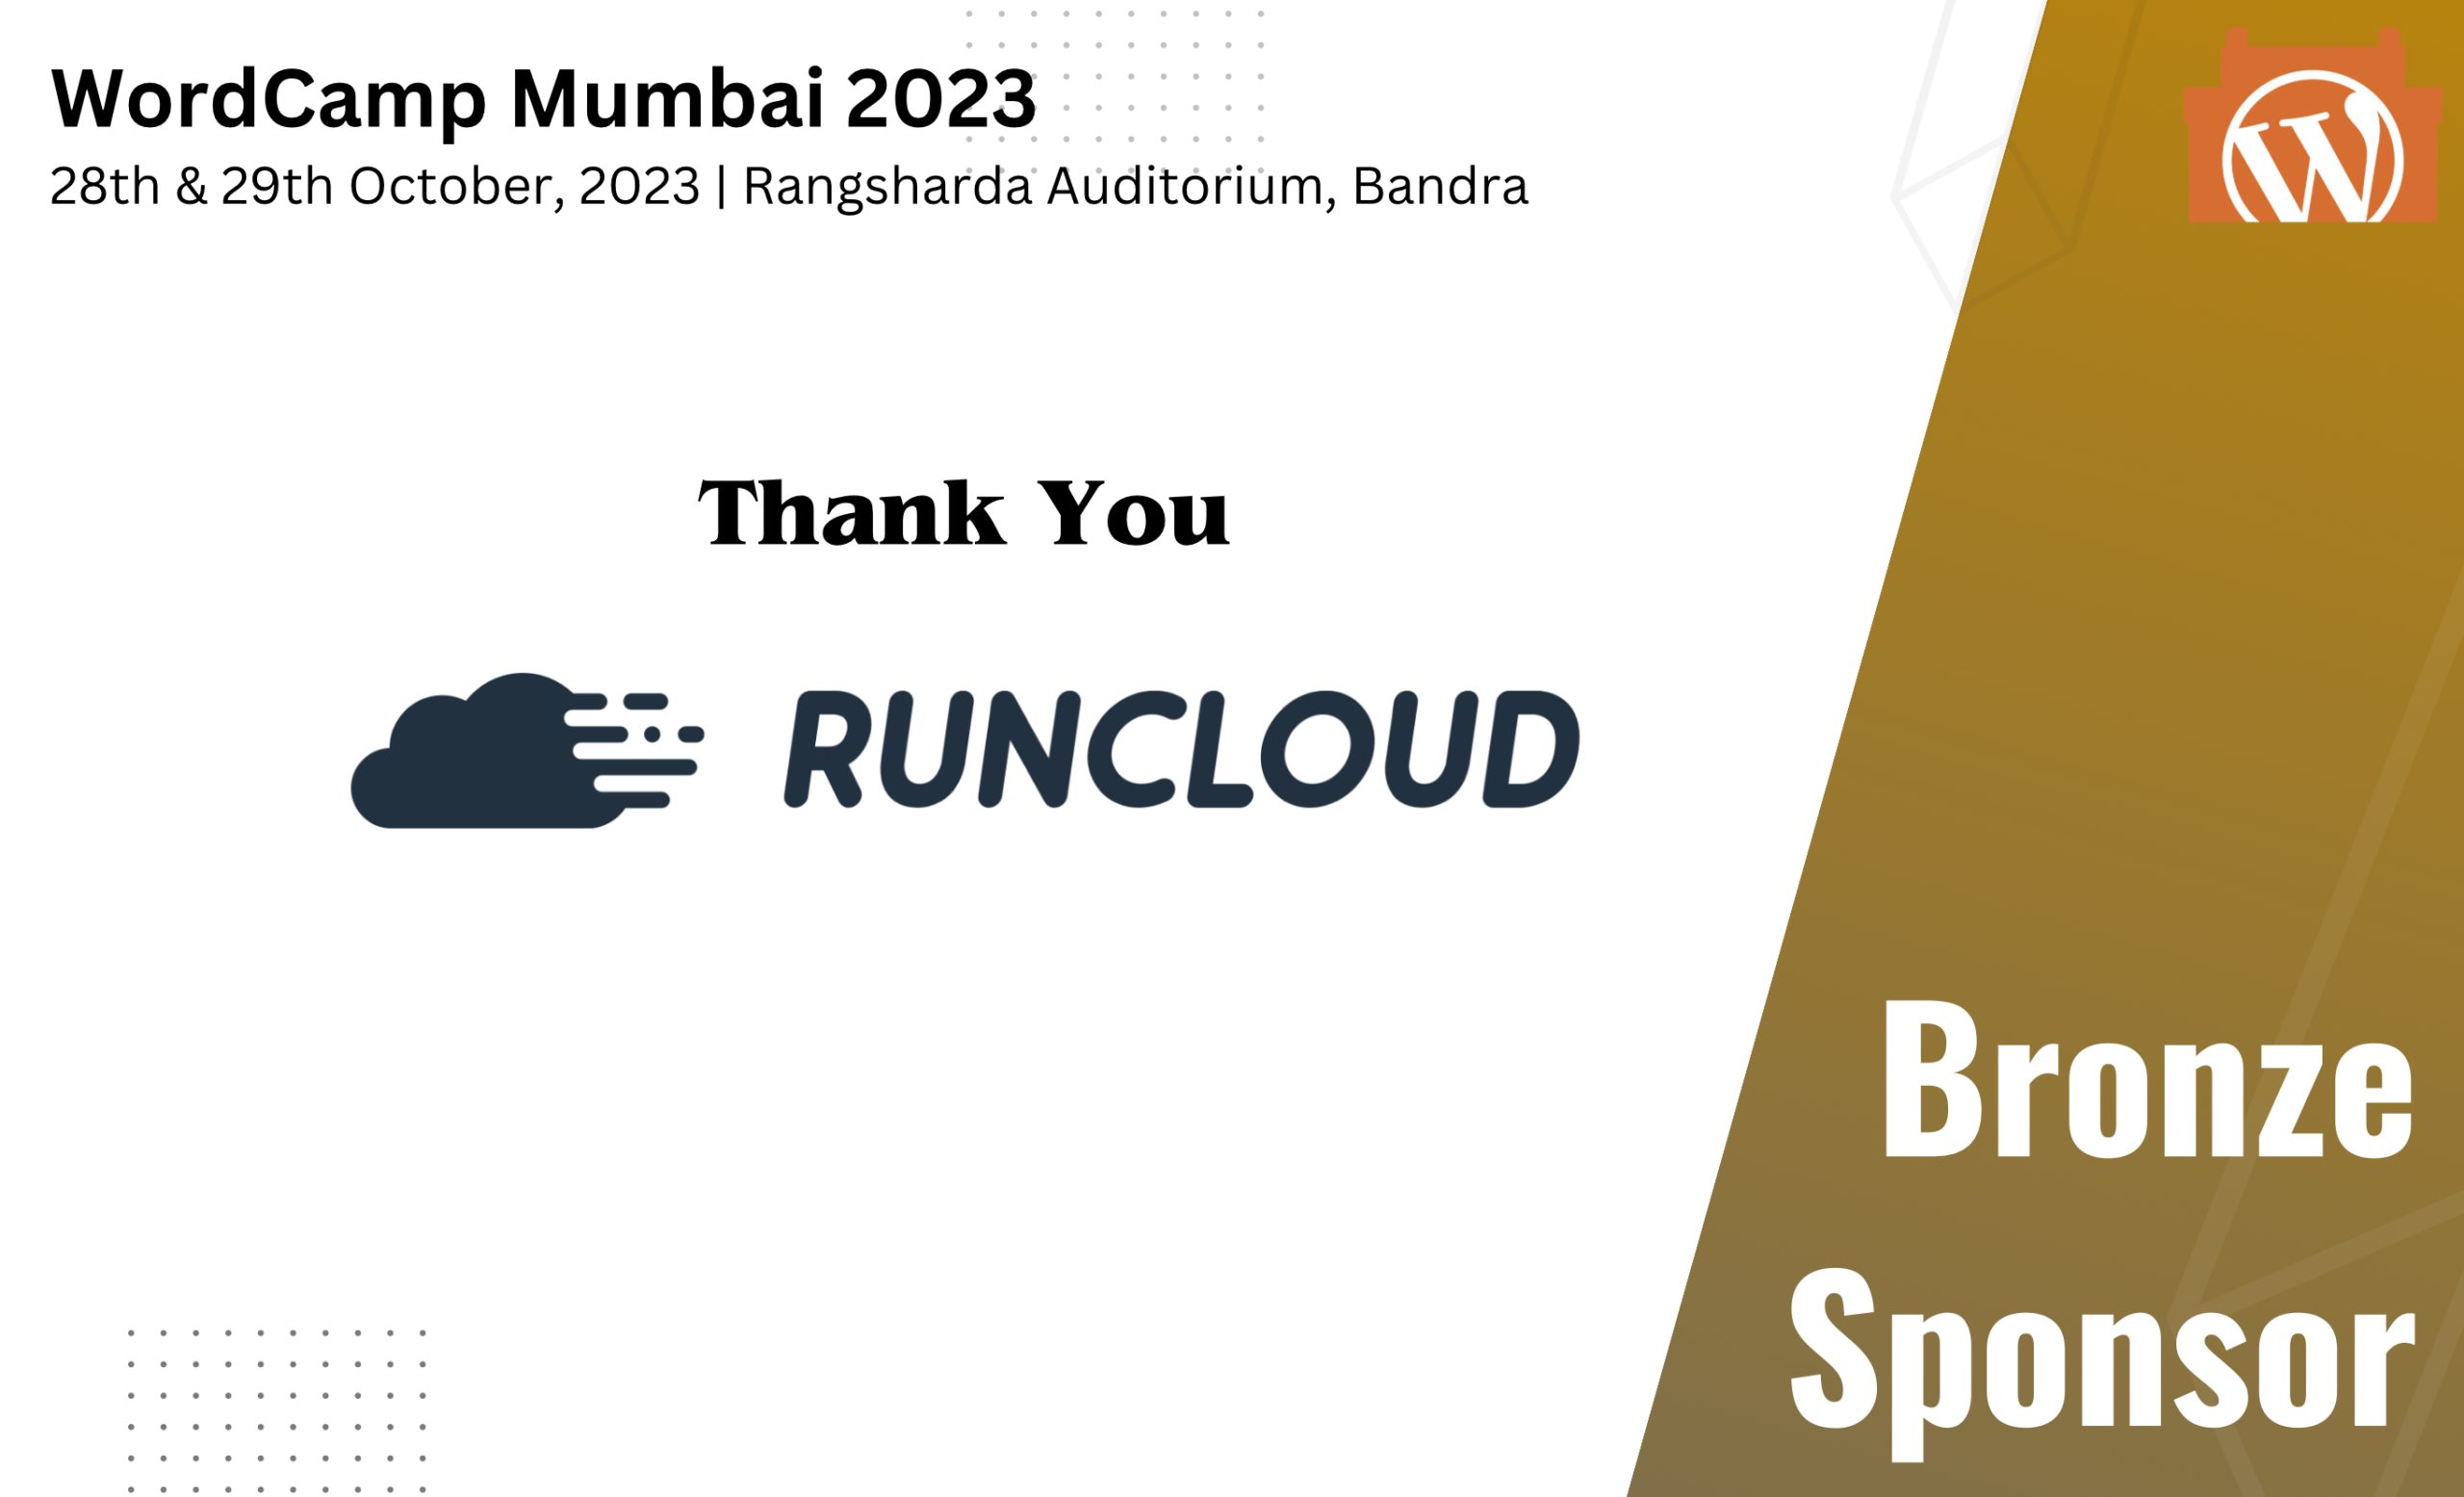 Thank You RunCloud, for being our Bronze Sponsor